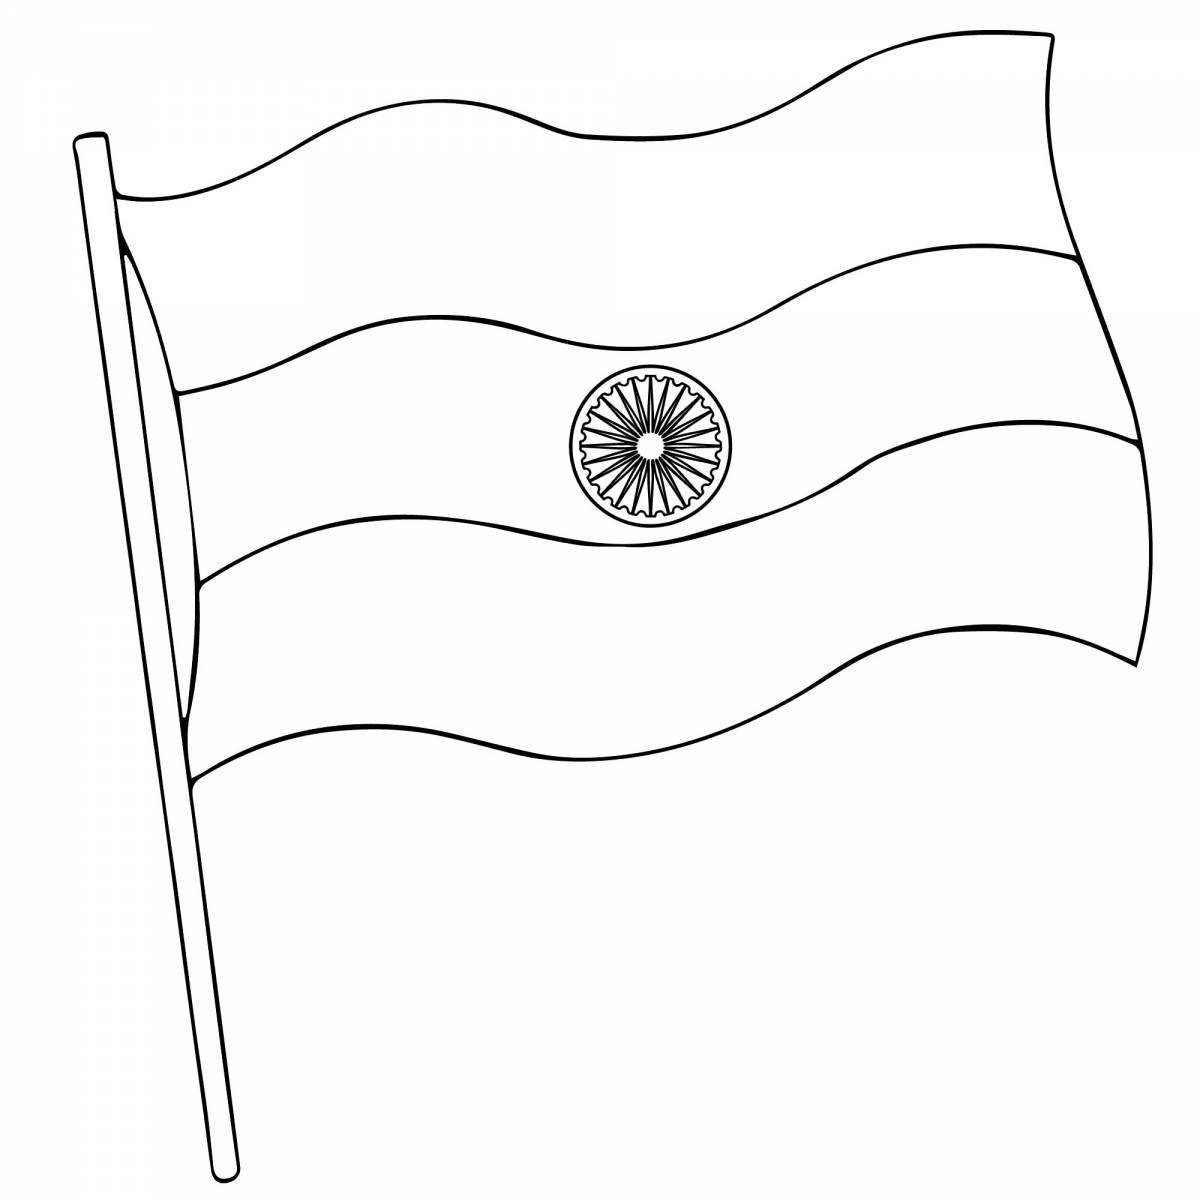 Fun flag coloring for kids